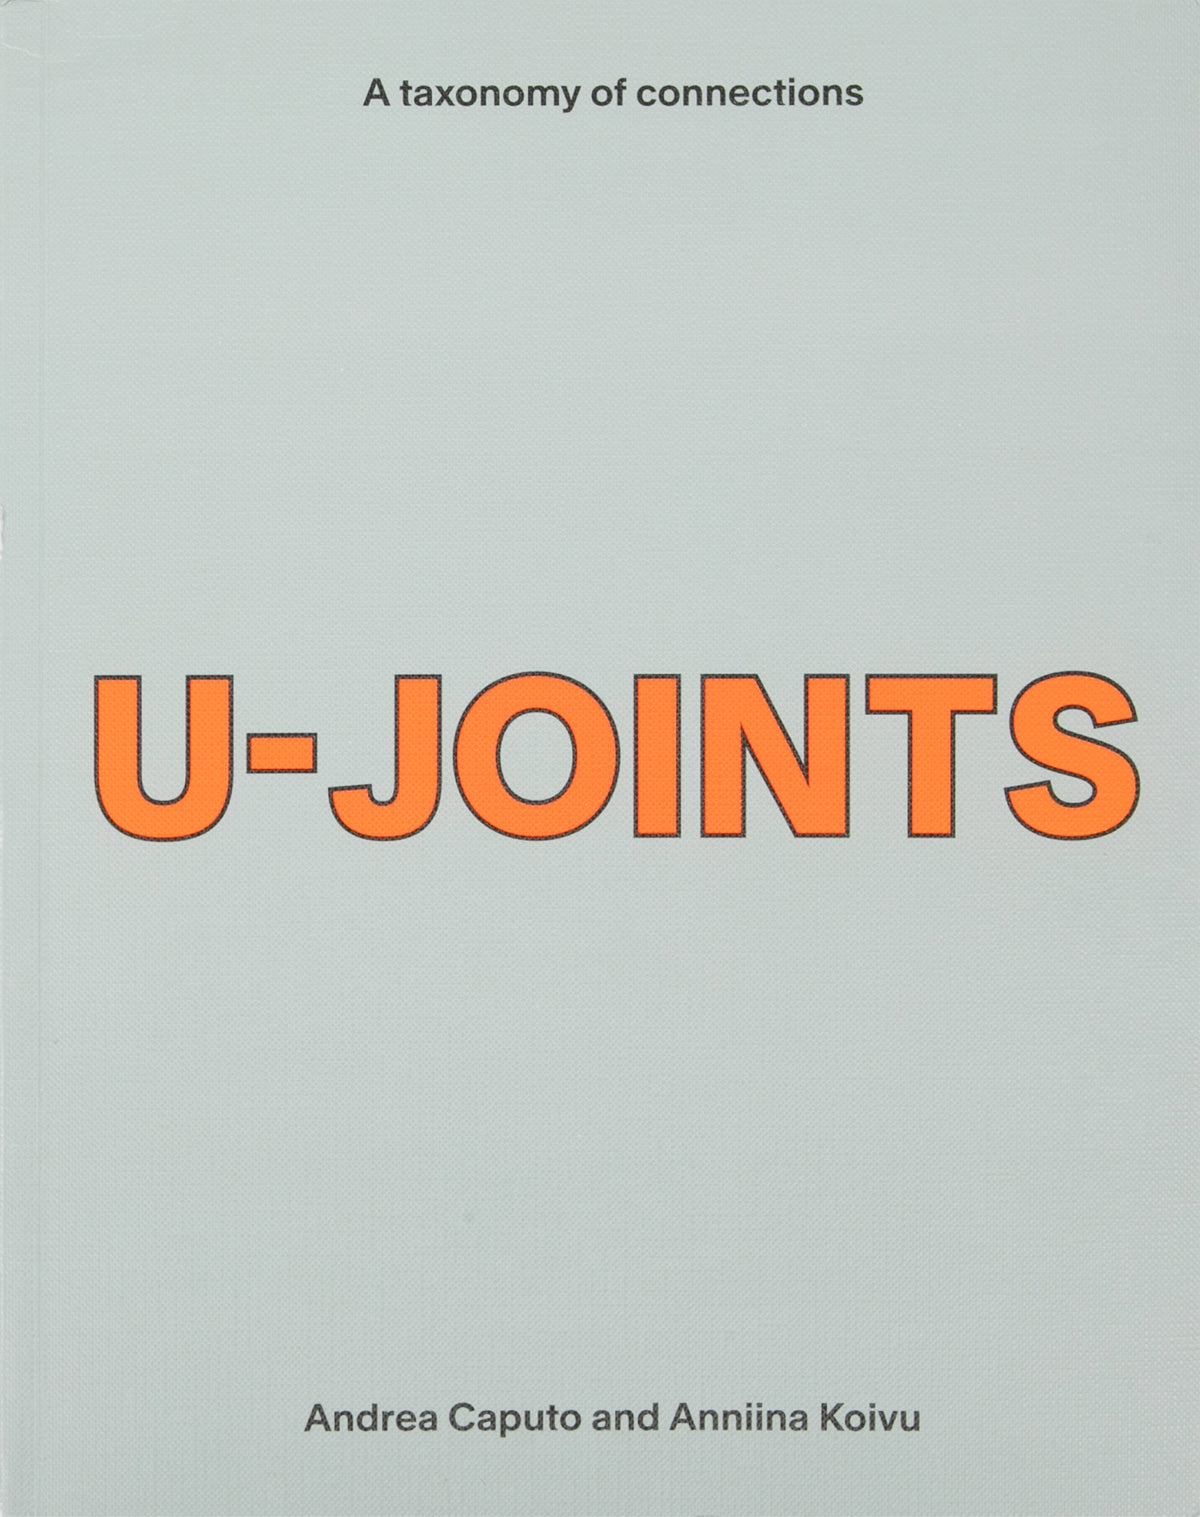 U-JOINTS: A taxonomy of connections